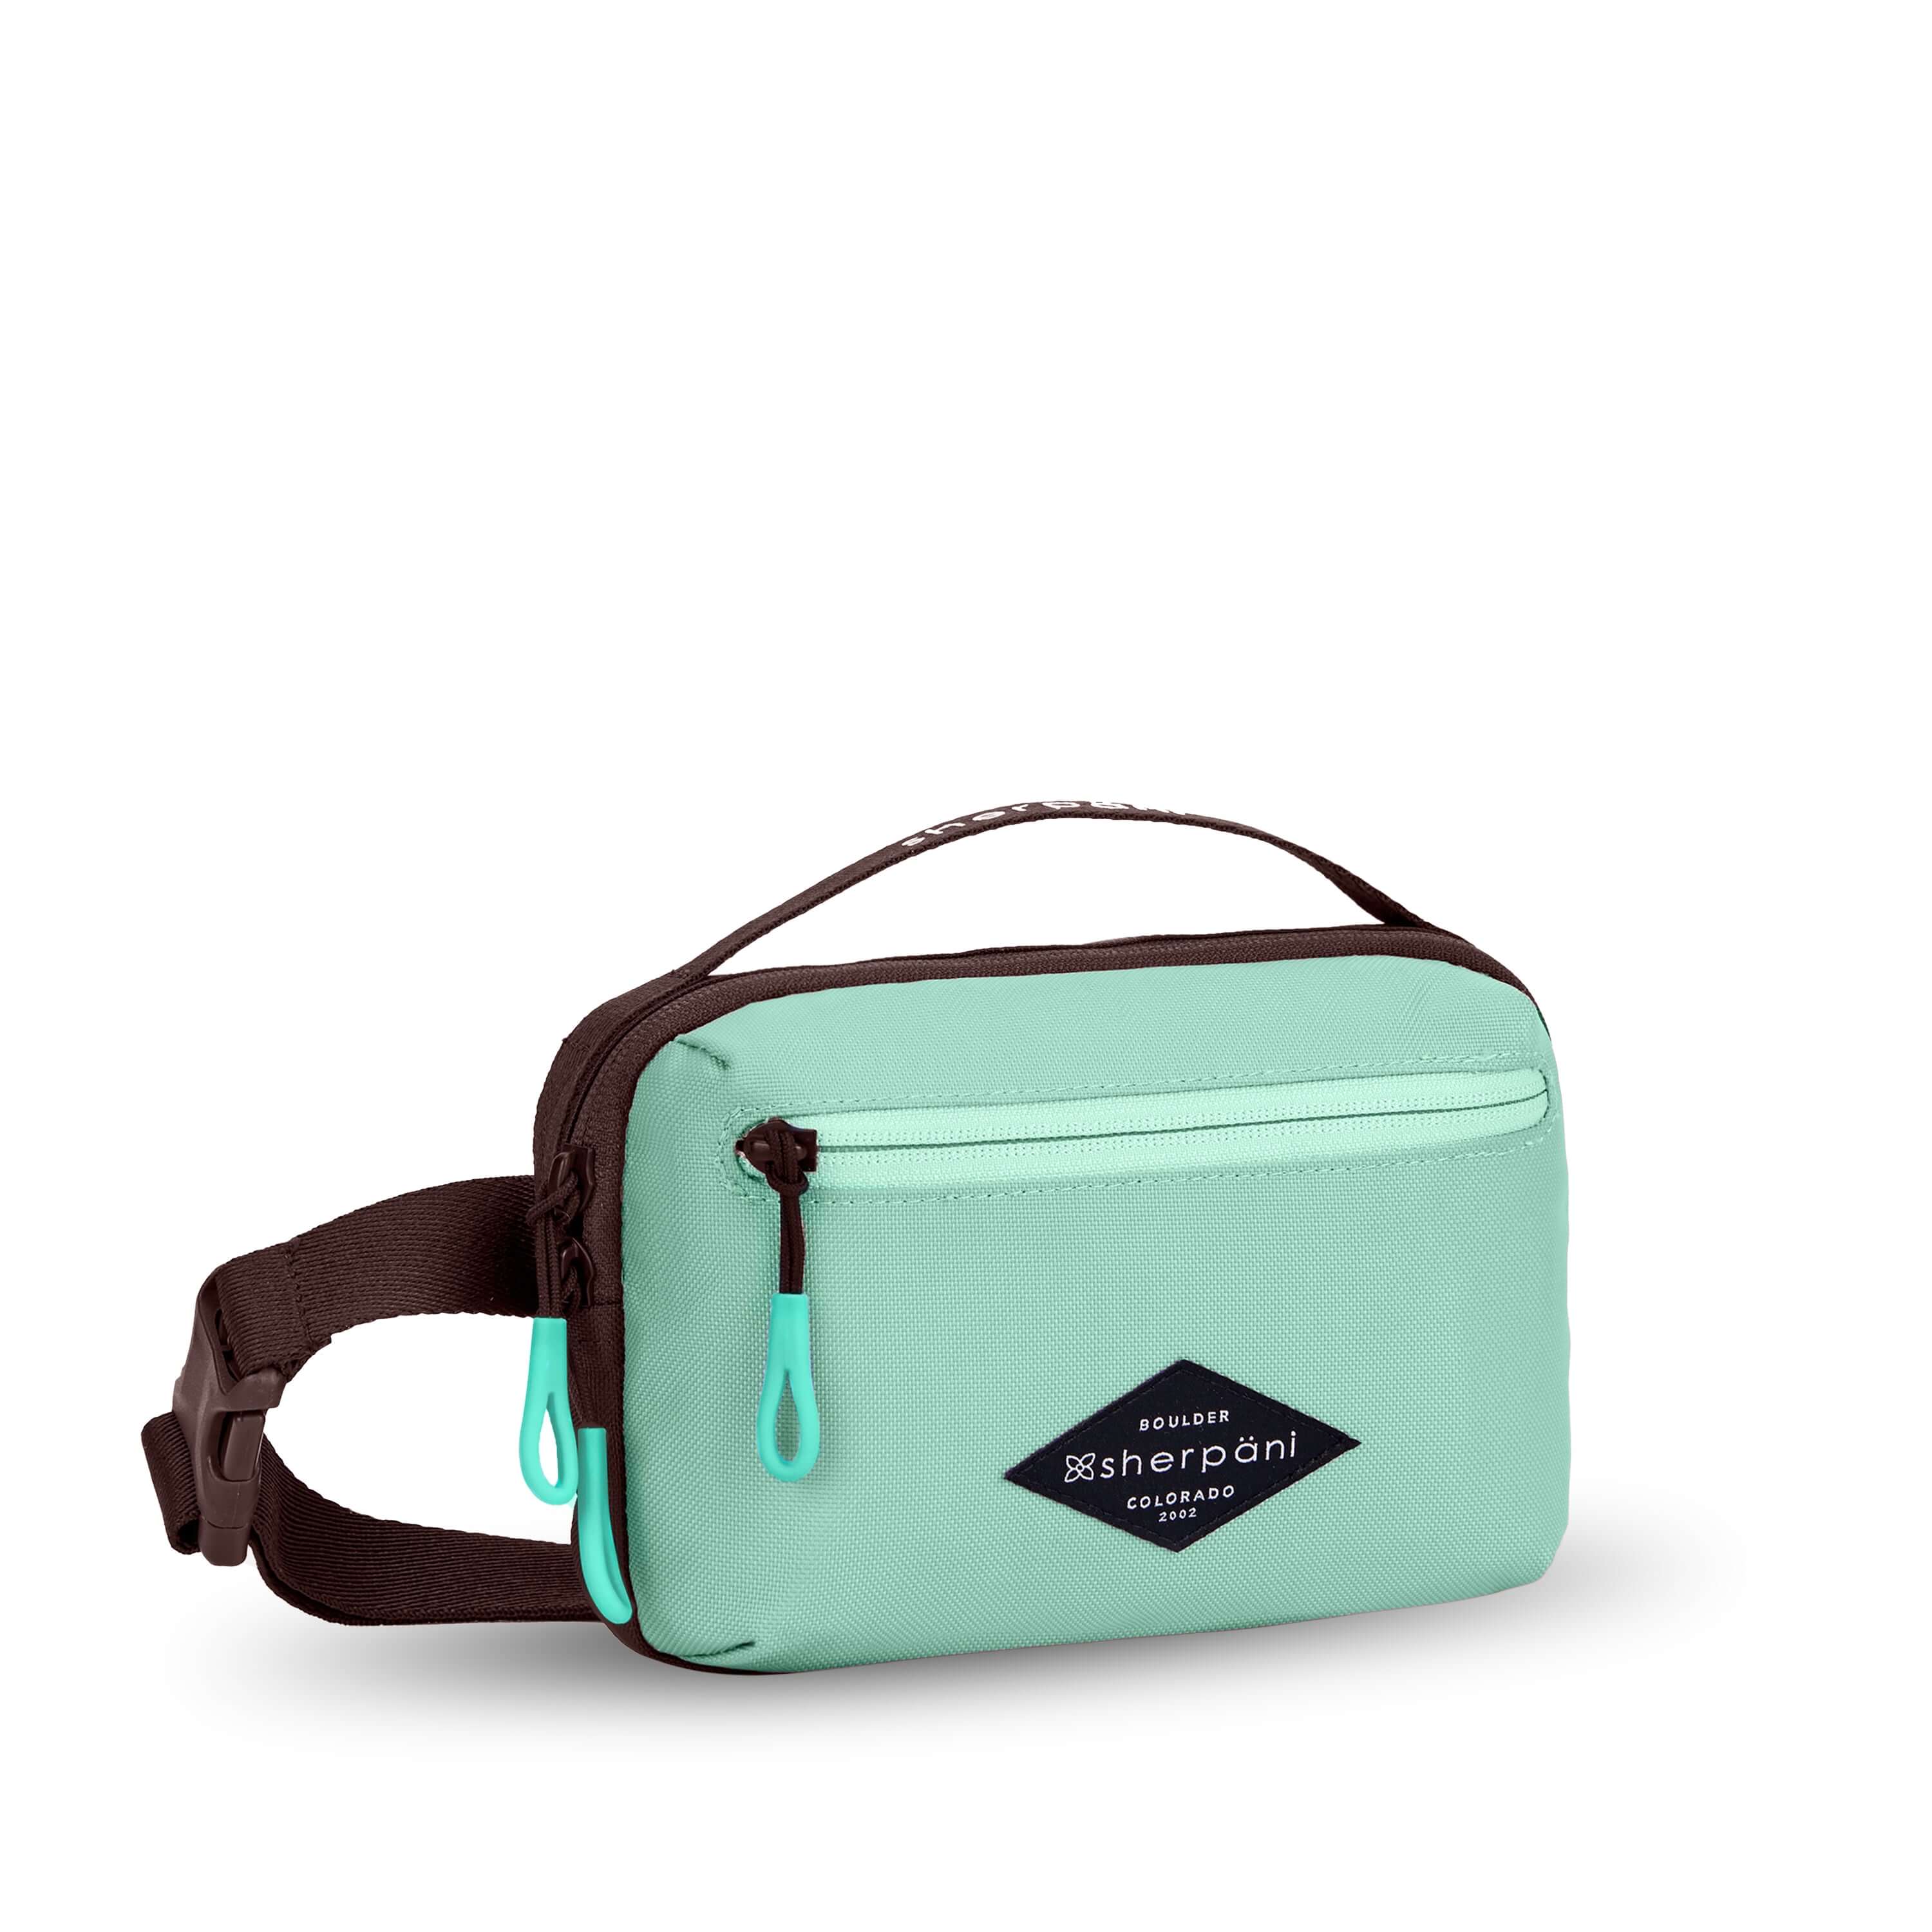 Angled front view of Sherpani’s fanny pack, the Hyk in Seagreen. The bag is two-toned, the front half is light green and the back half is brown. There is an external zipper pocket on the front of the bag. Easy-pull zippers are accented in light green. The fanny pack features an adjustable strap with a buckle. #color_seagreen